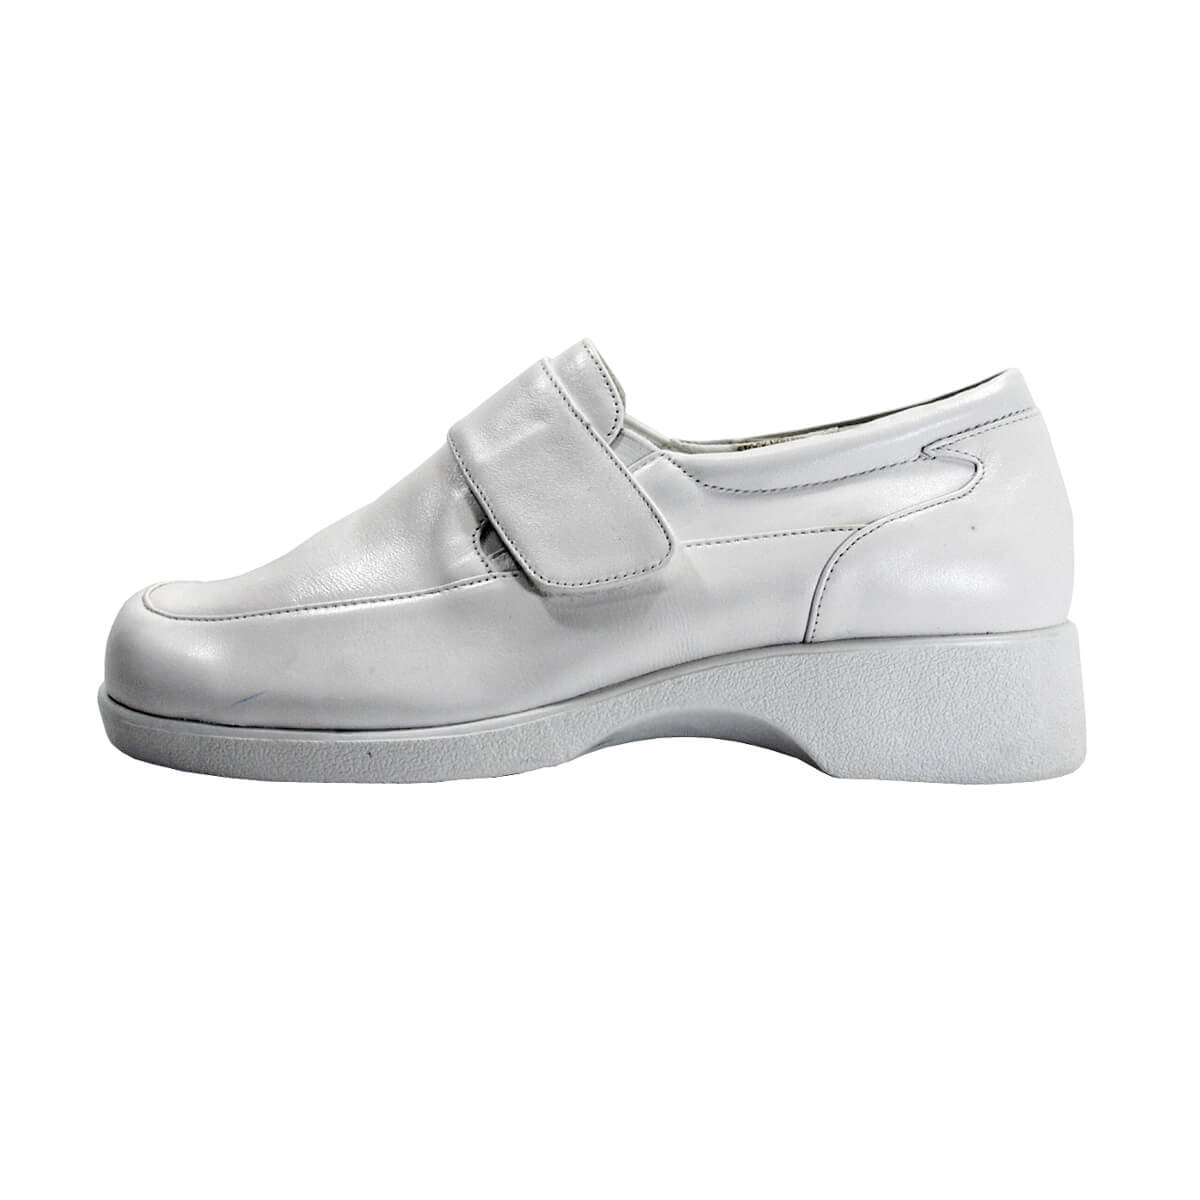 24 HOUR COMFORT Gail Women's Wide Width Leather Shoes